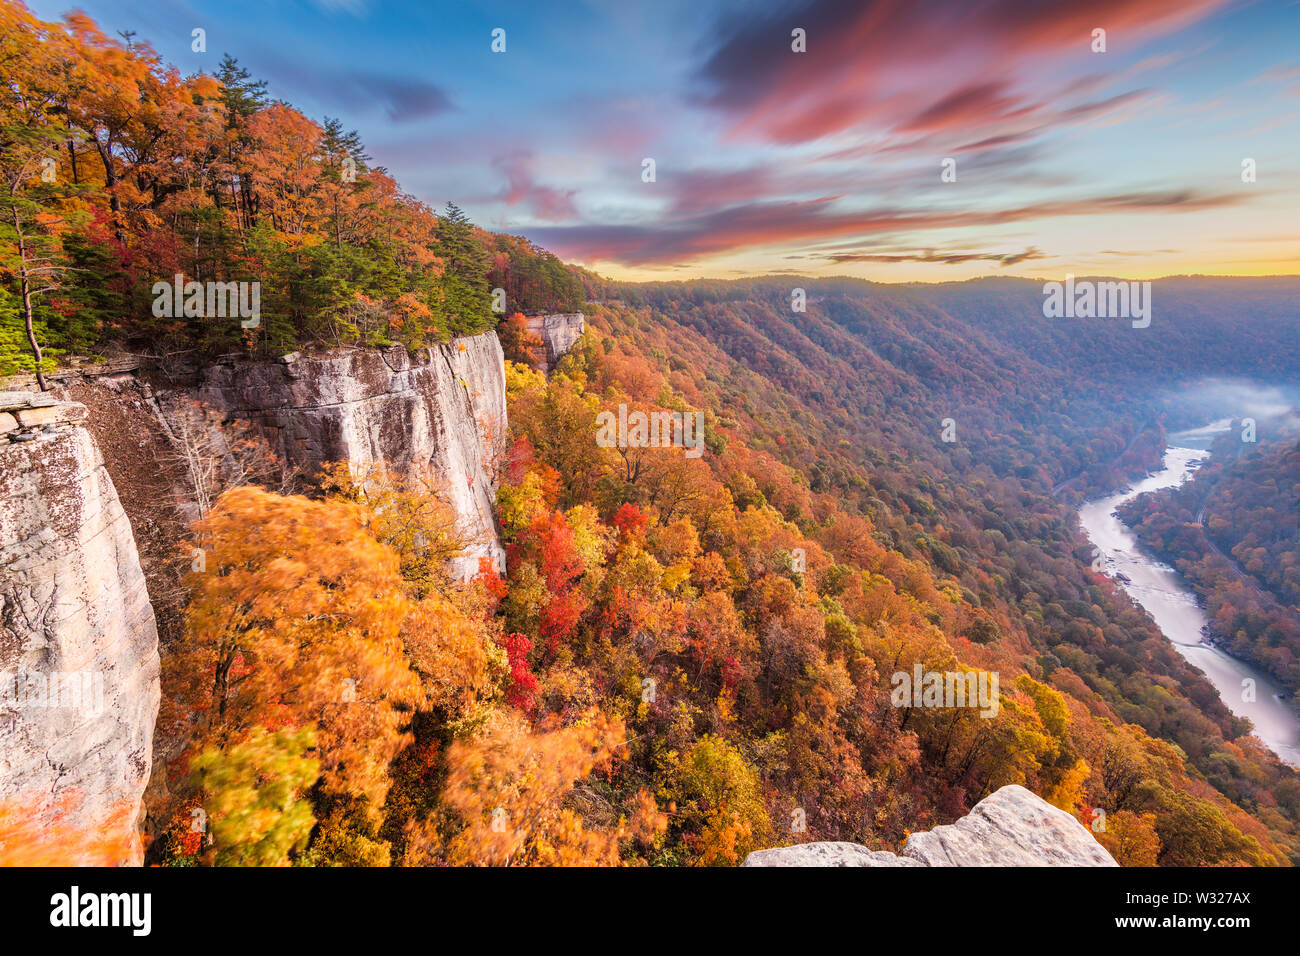 New River Gorge, West Virgnia, USA autumn morning lanscape at the Endless Wall. Stock Photo